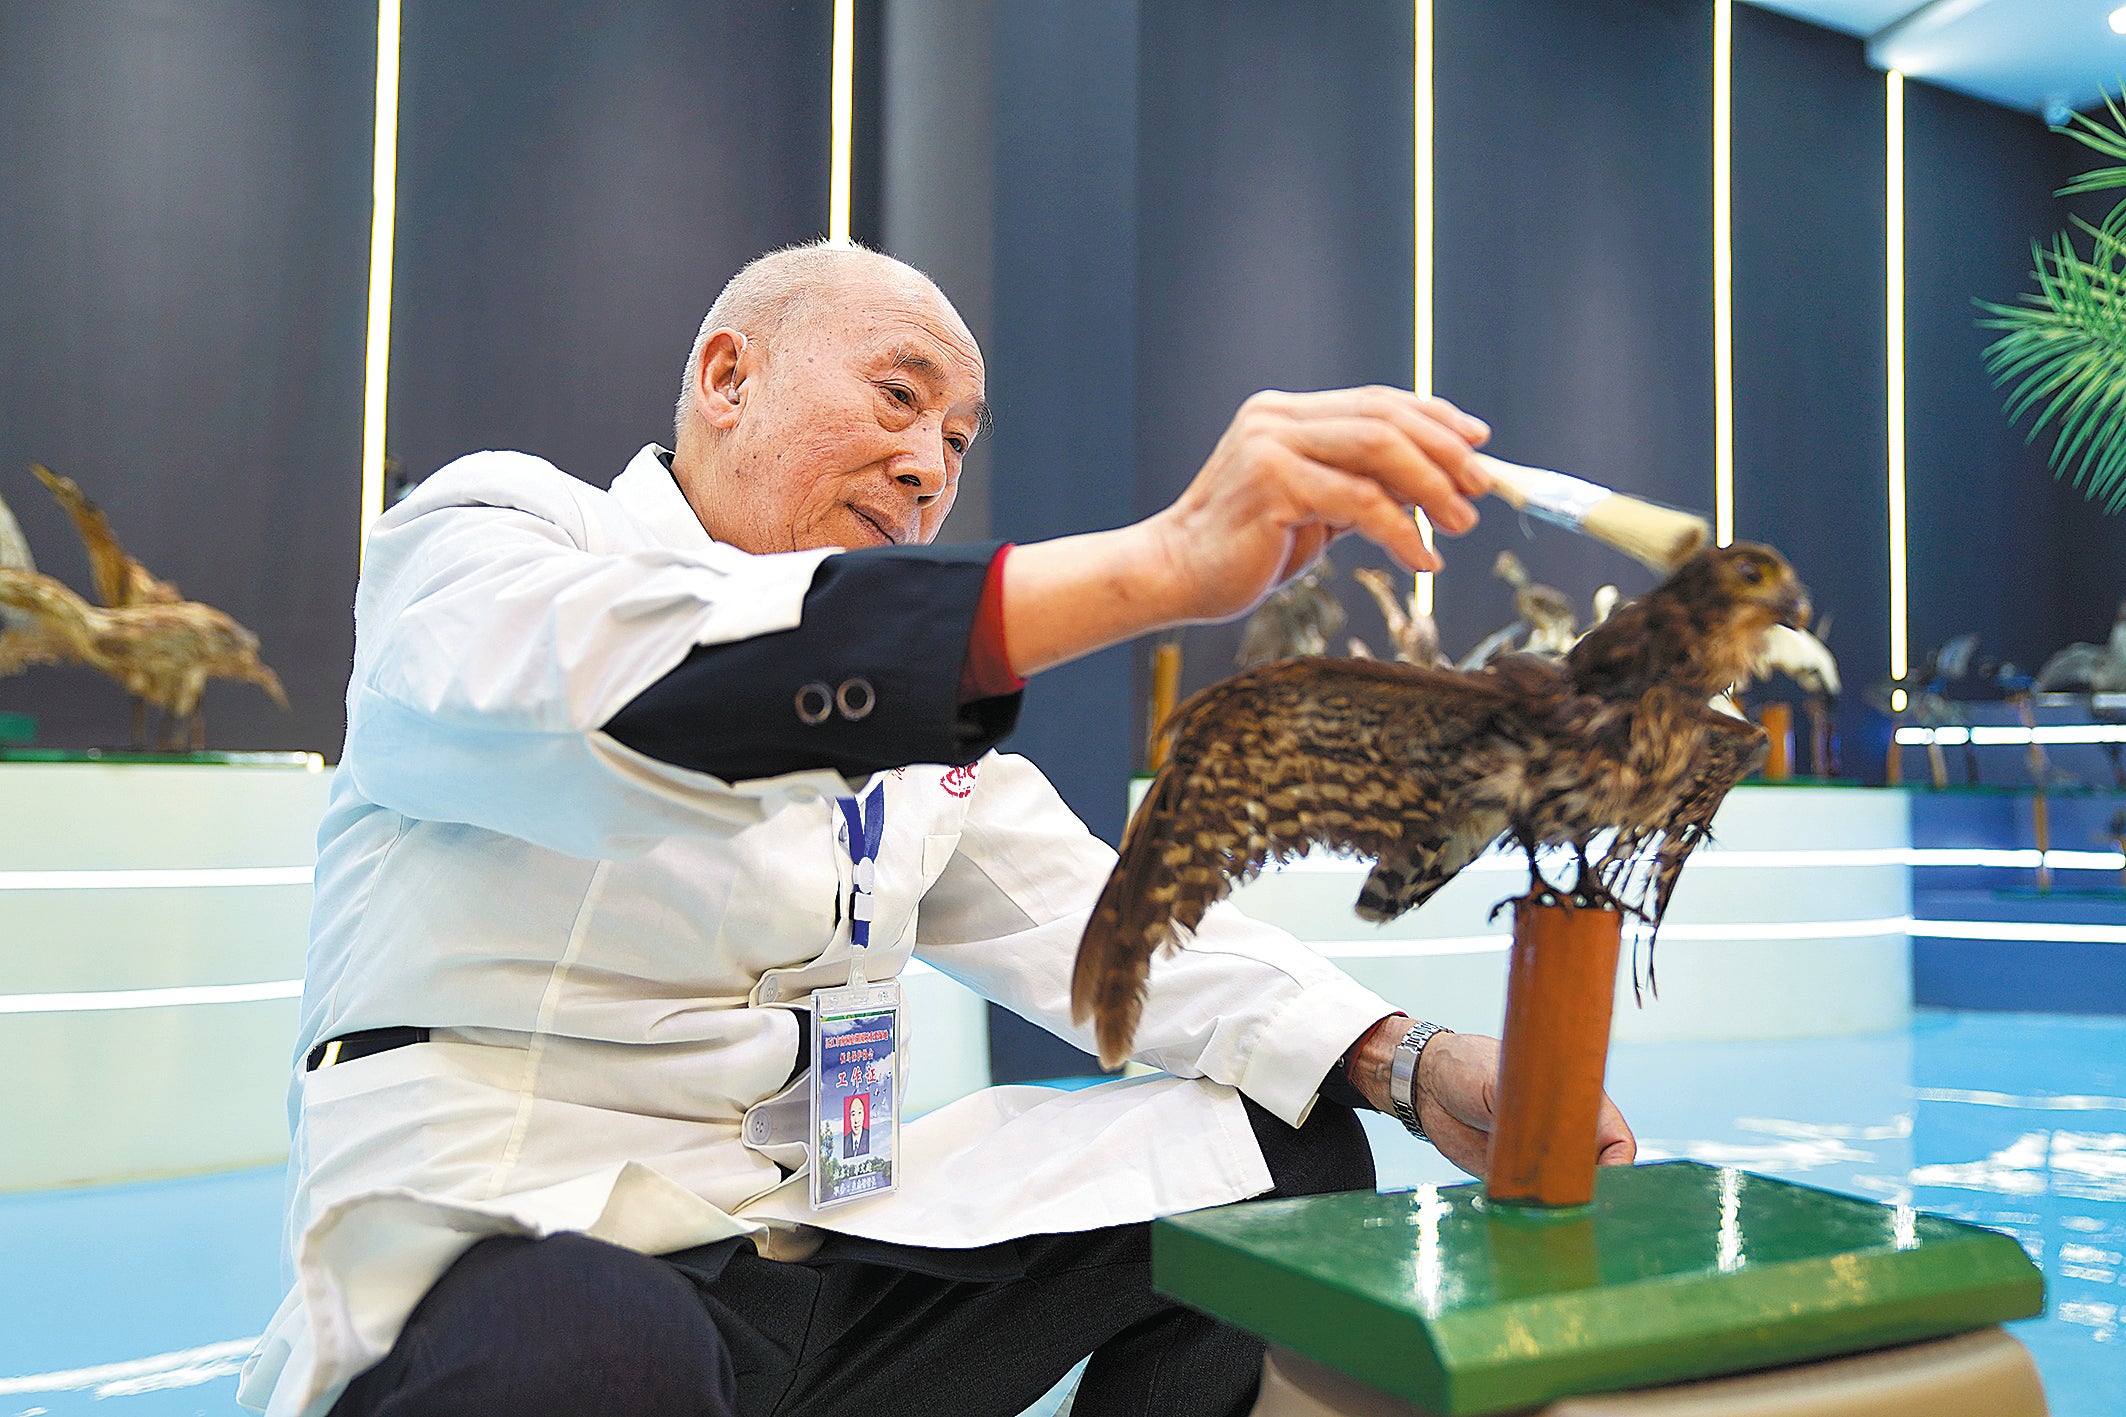 Li Wenjian gives the final touch on a taxidermied bird at the Dongting Lake biodiversity gallery in Sanyantang village, Hunan province